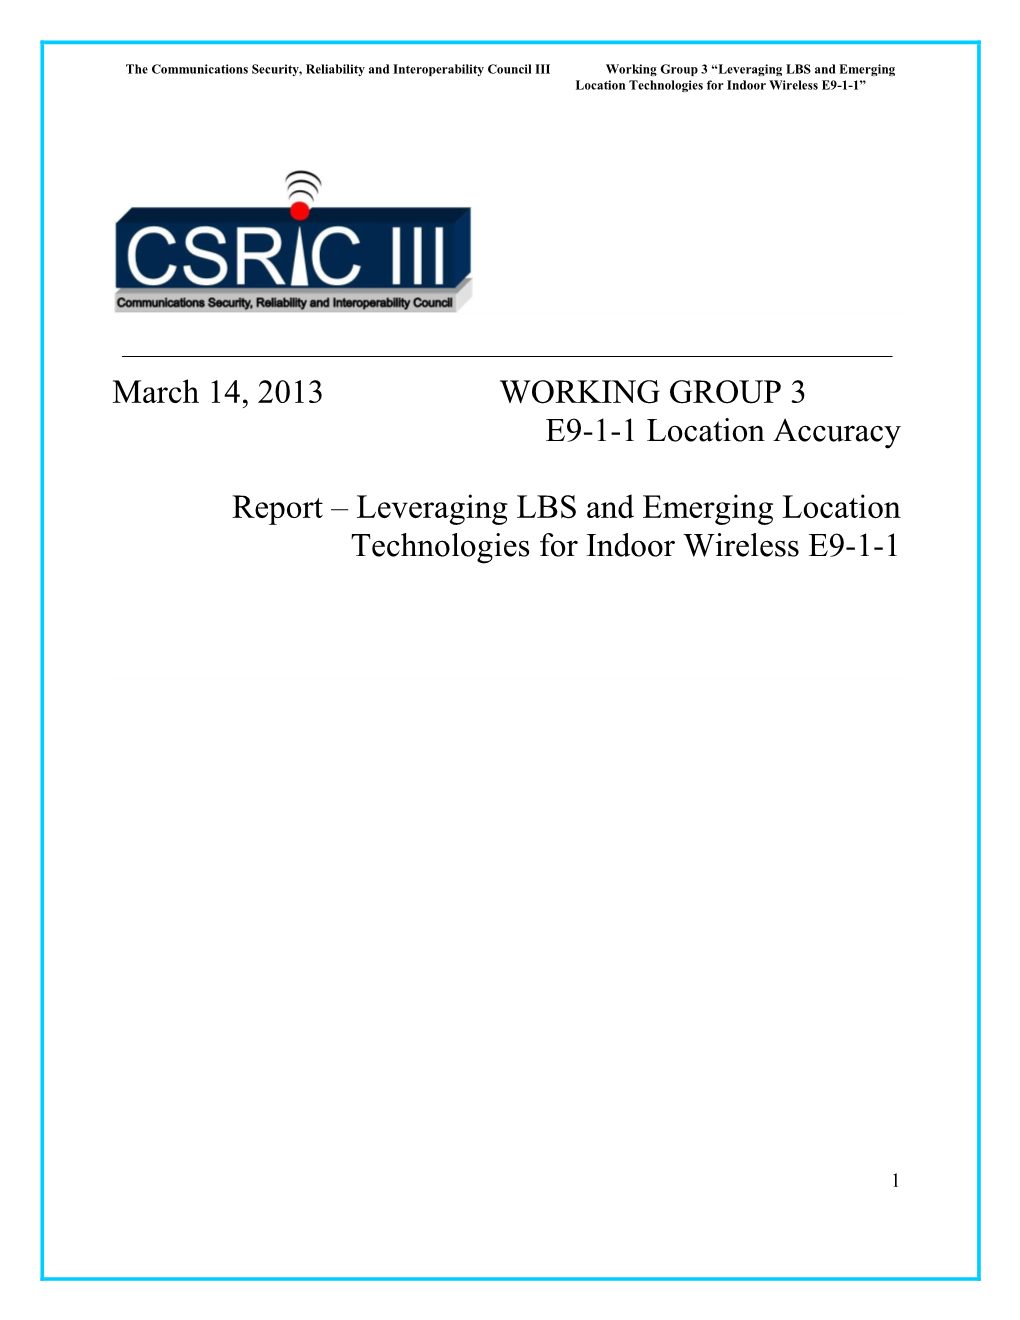 CSRIC III Report on Leveraging LBS and Emerging Location